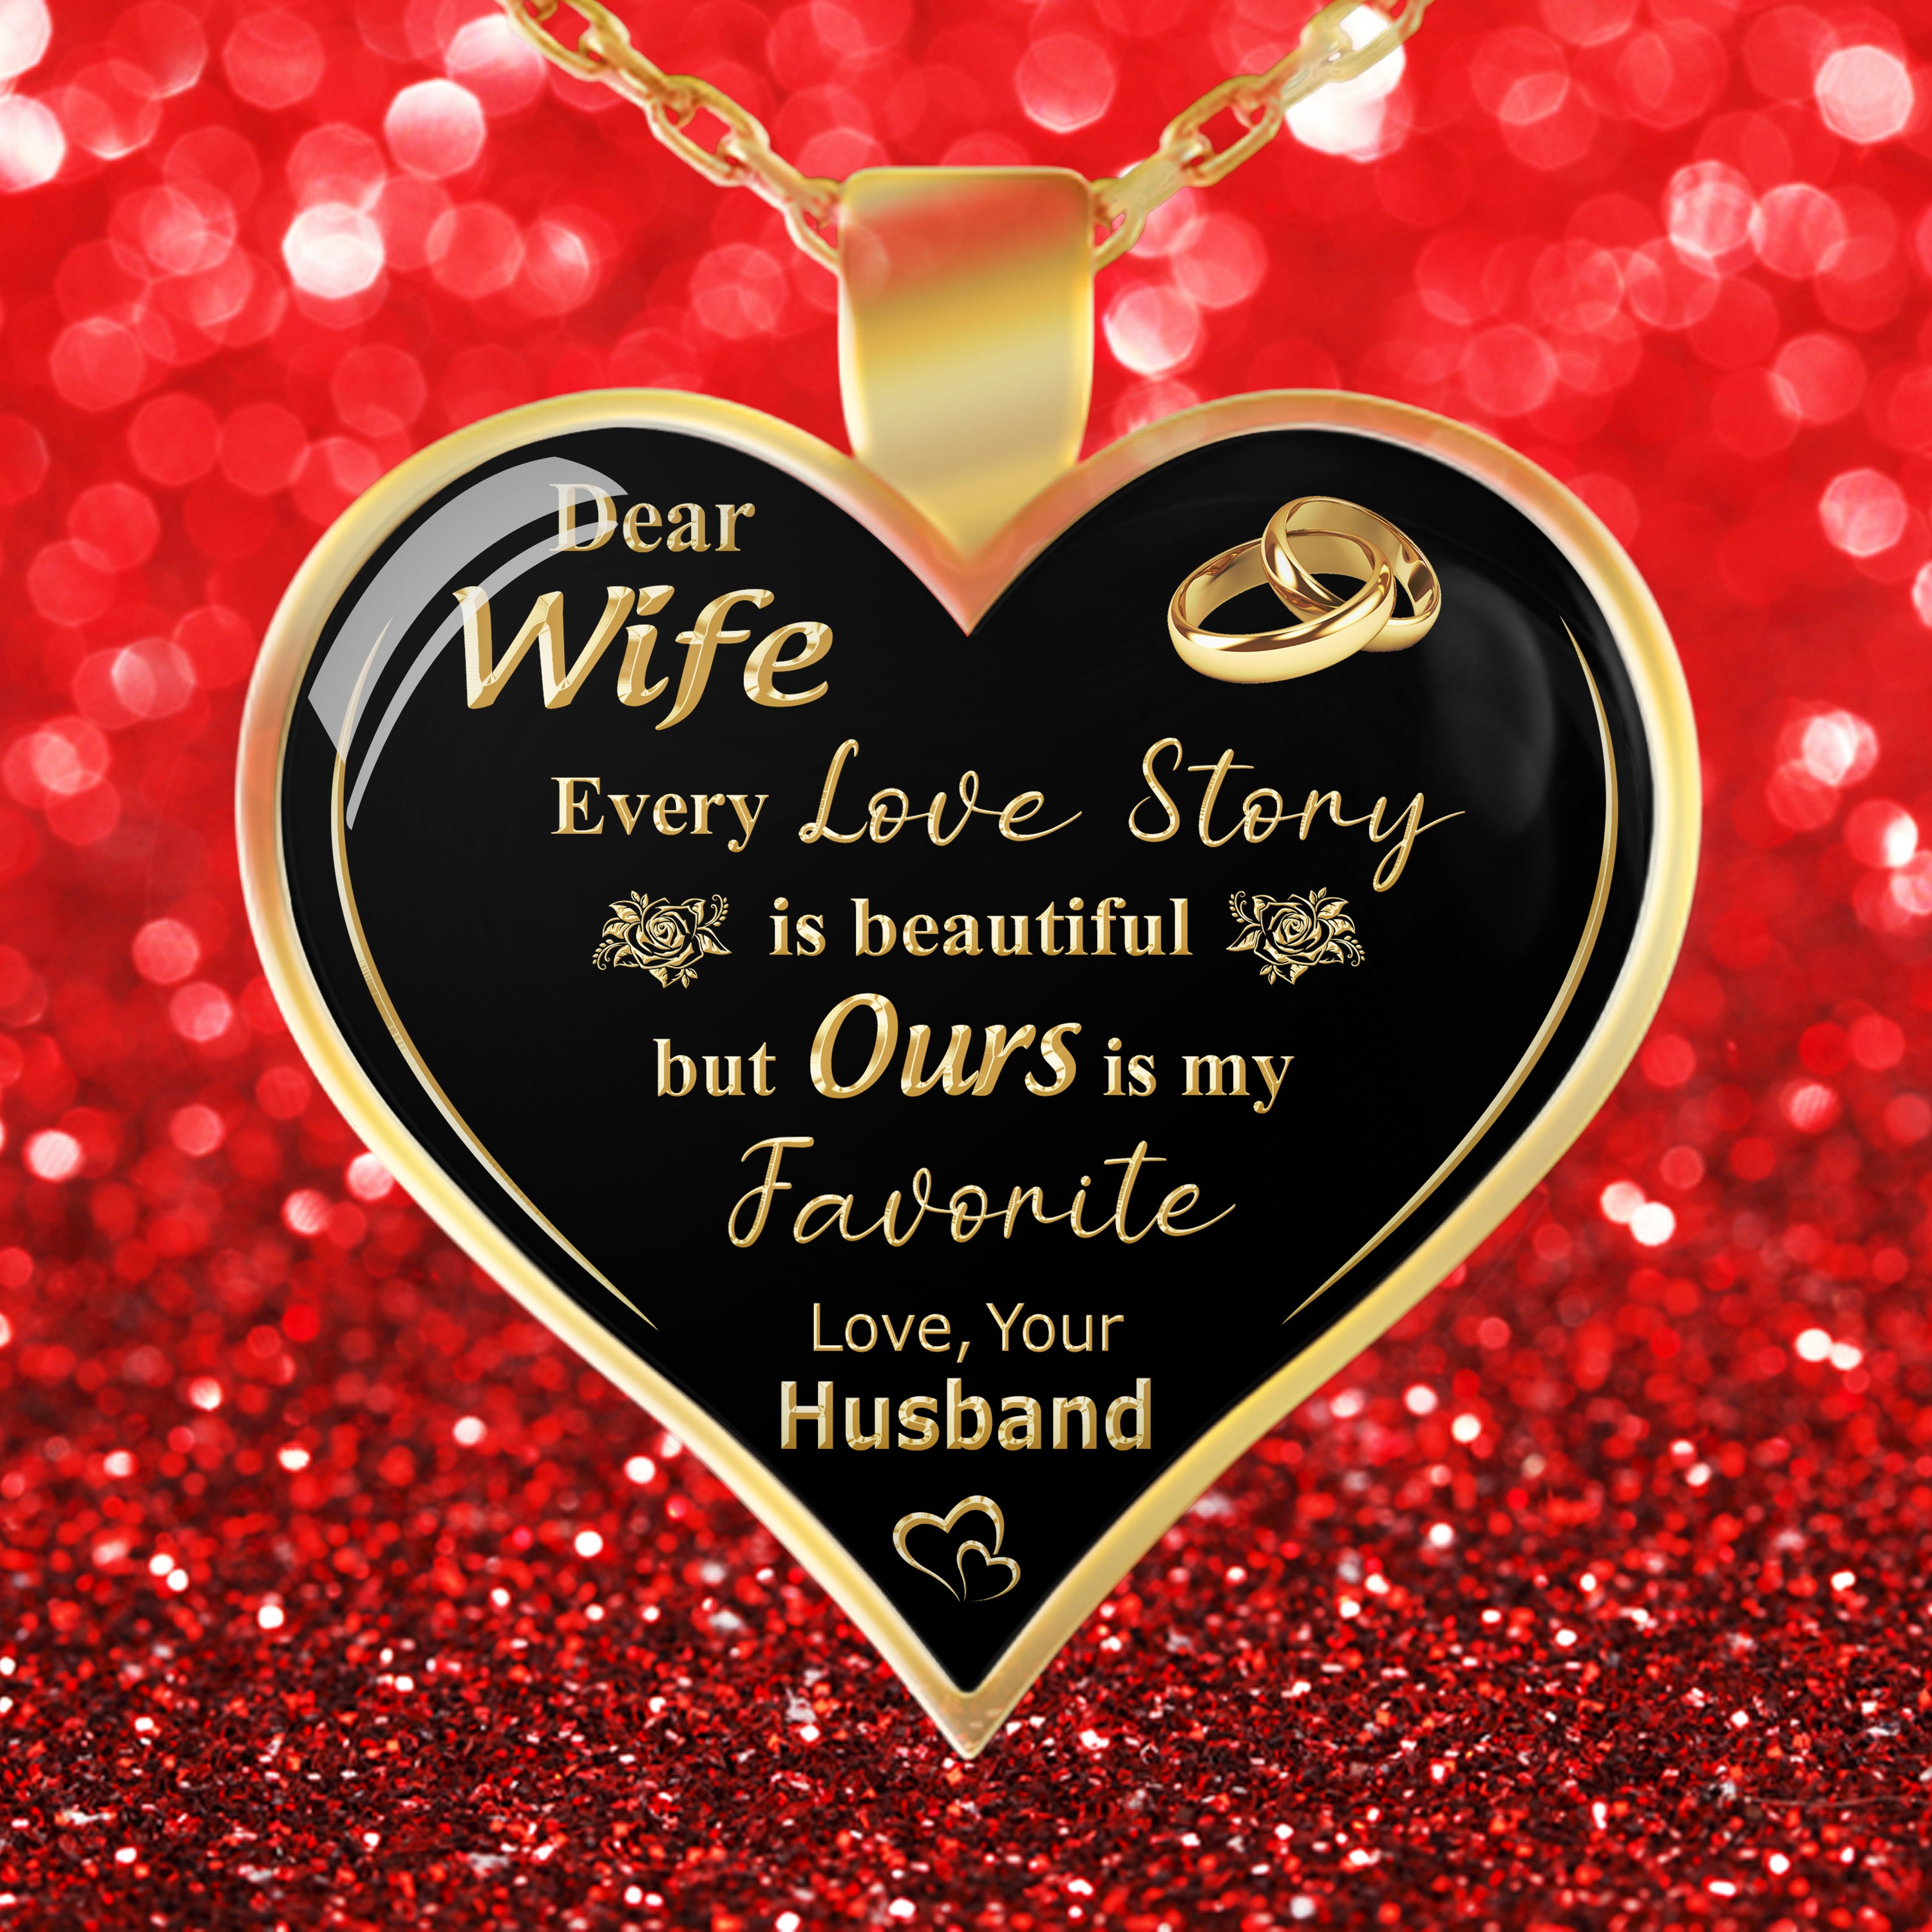 Dear Wife - "Our Love Story" Gold Pendant Necklace